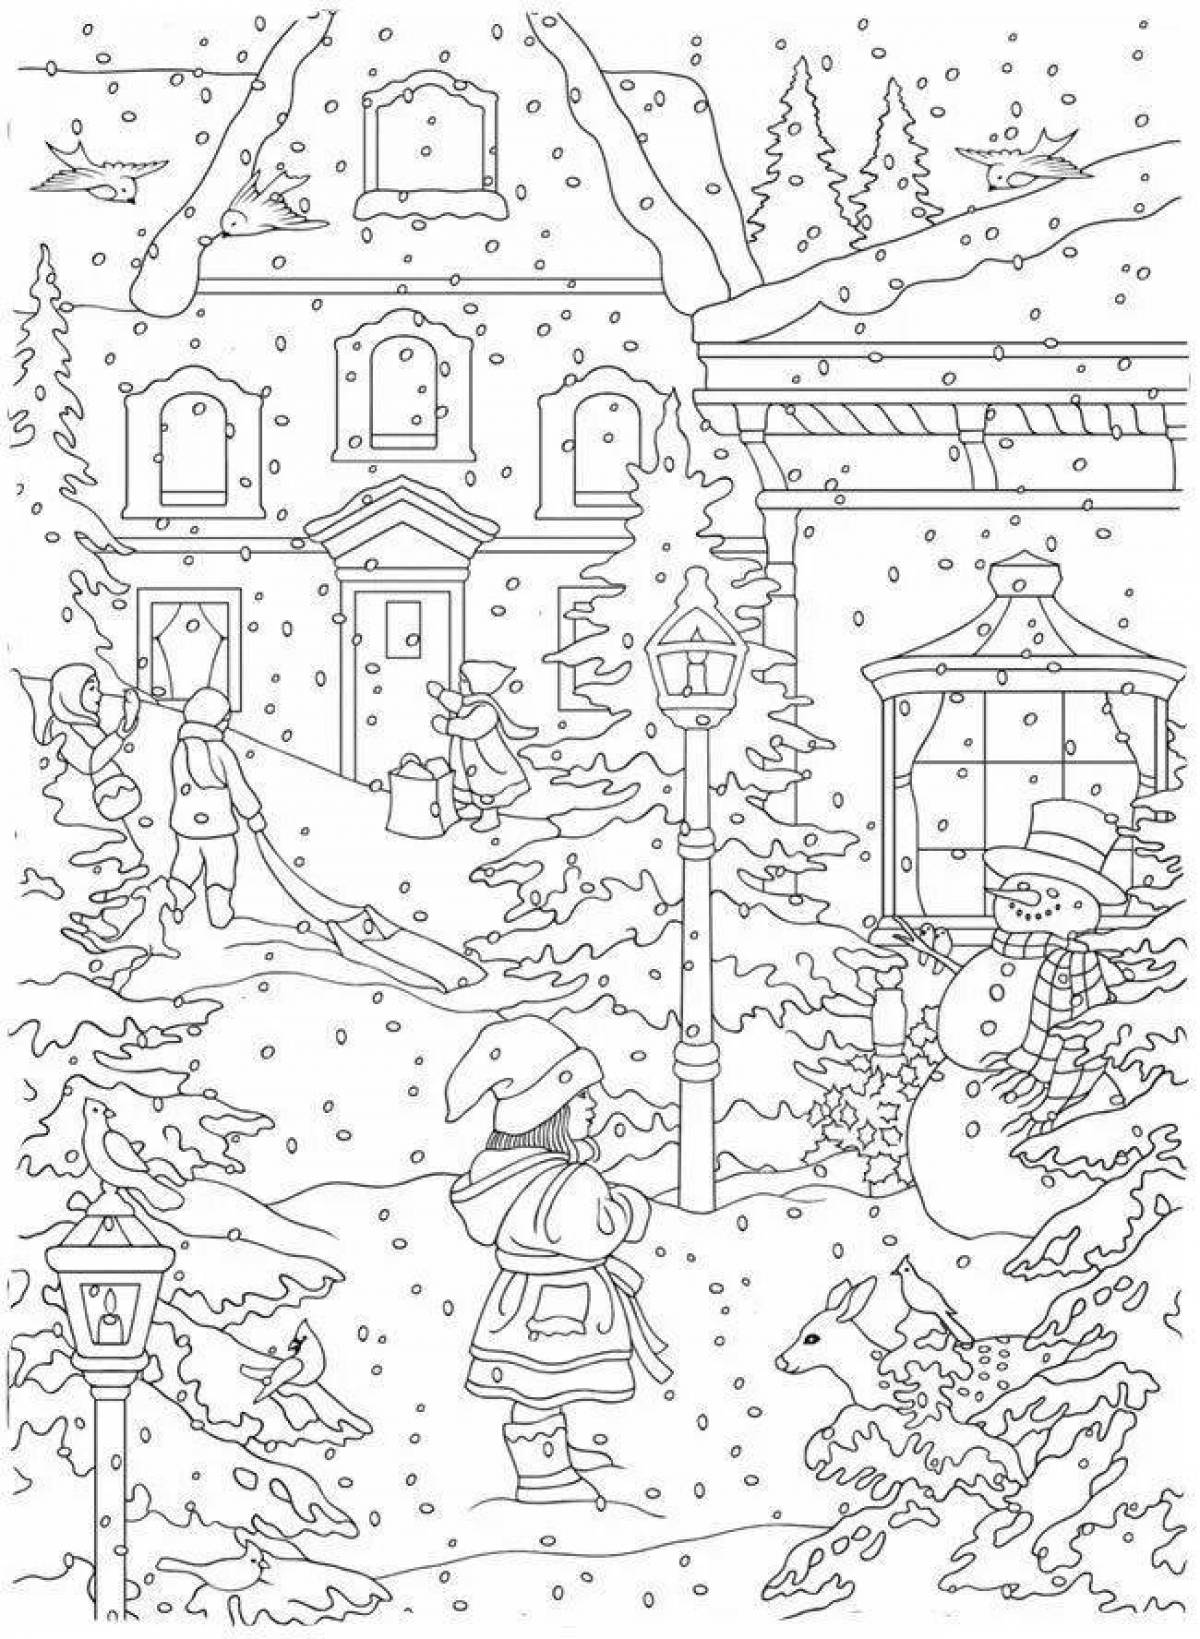 Live winter Christmas coloring book